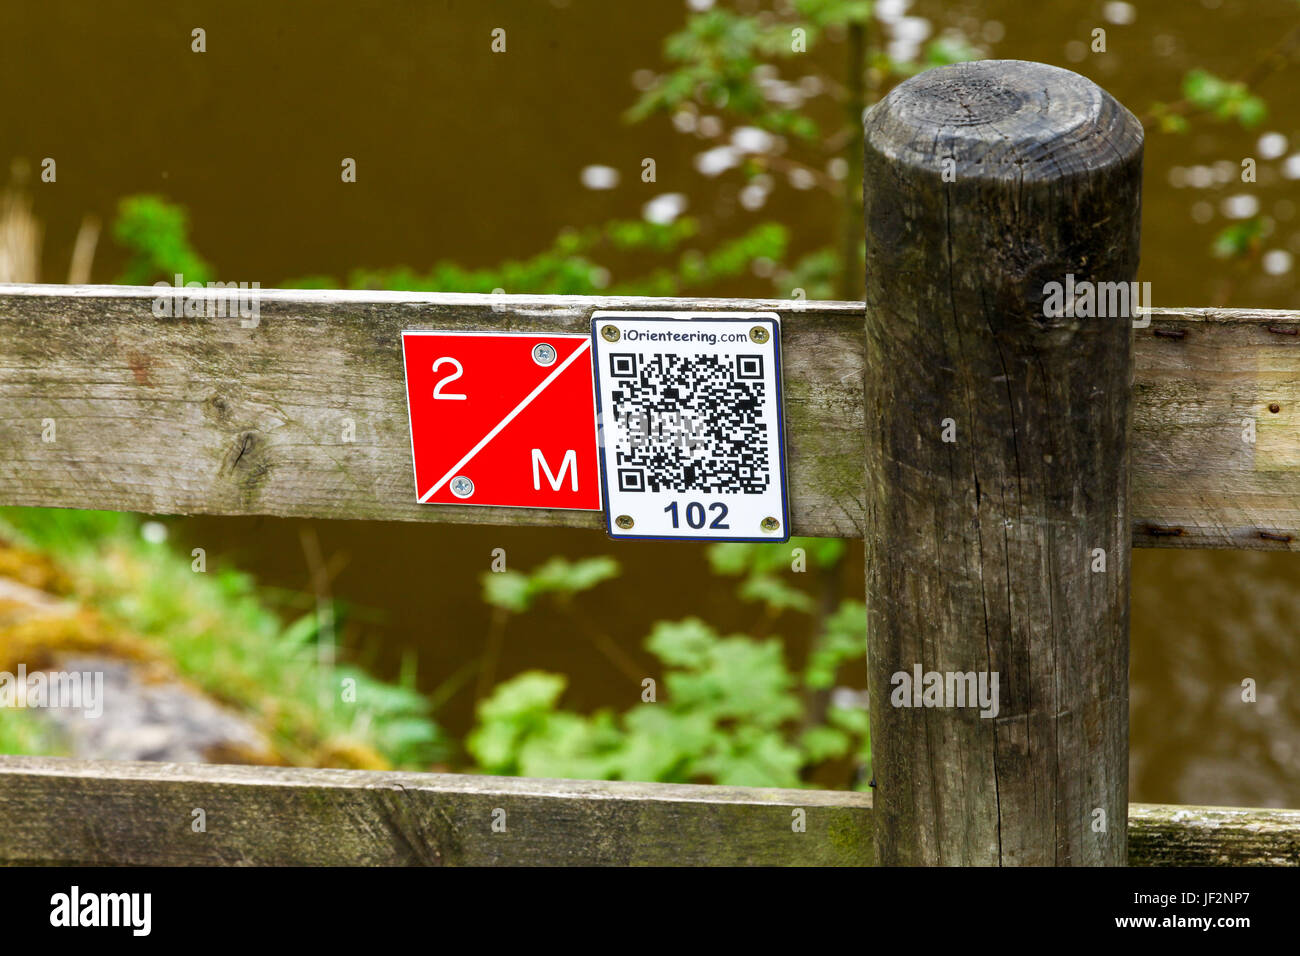 An orienteering QR code control marker by iOrienteering.com on a wooden fence Stock Photo